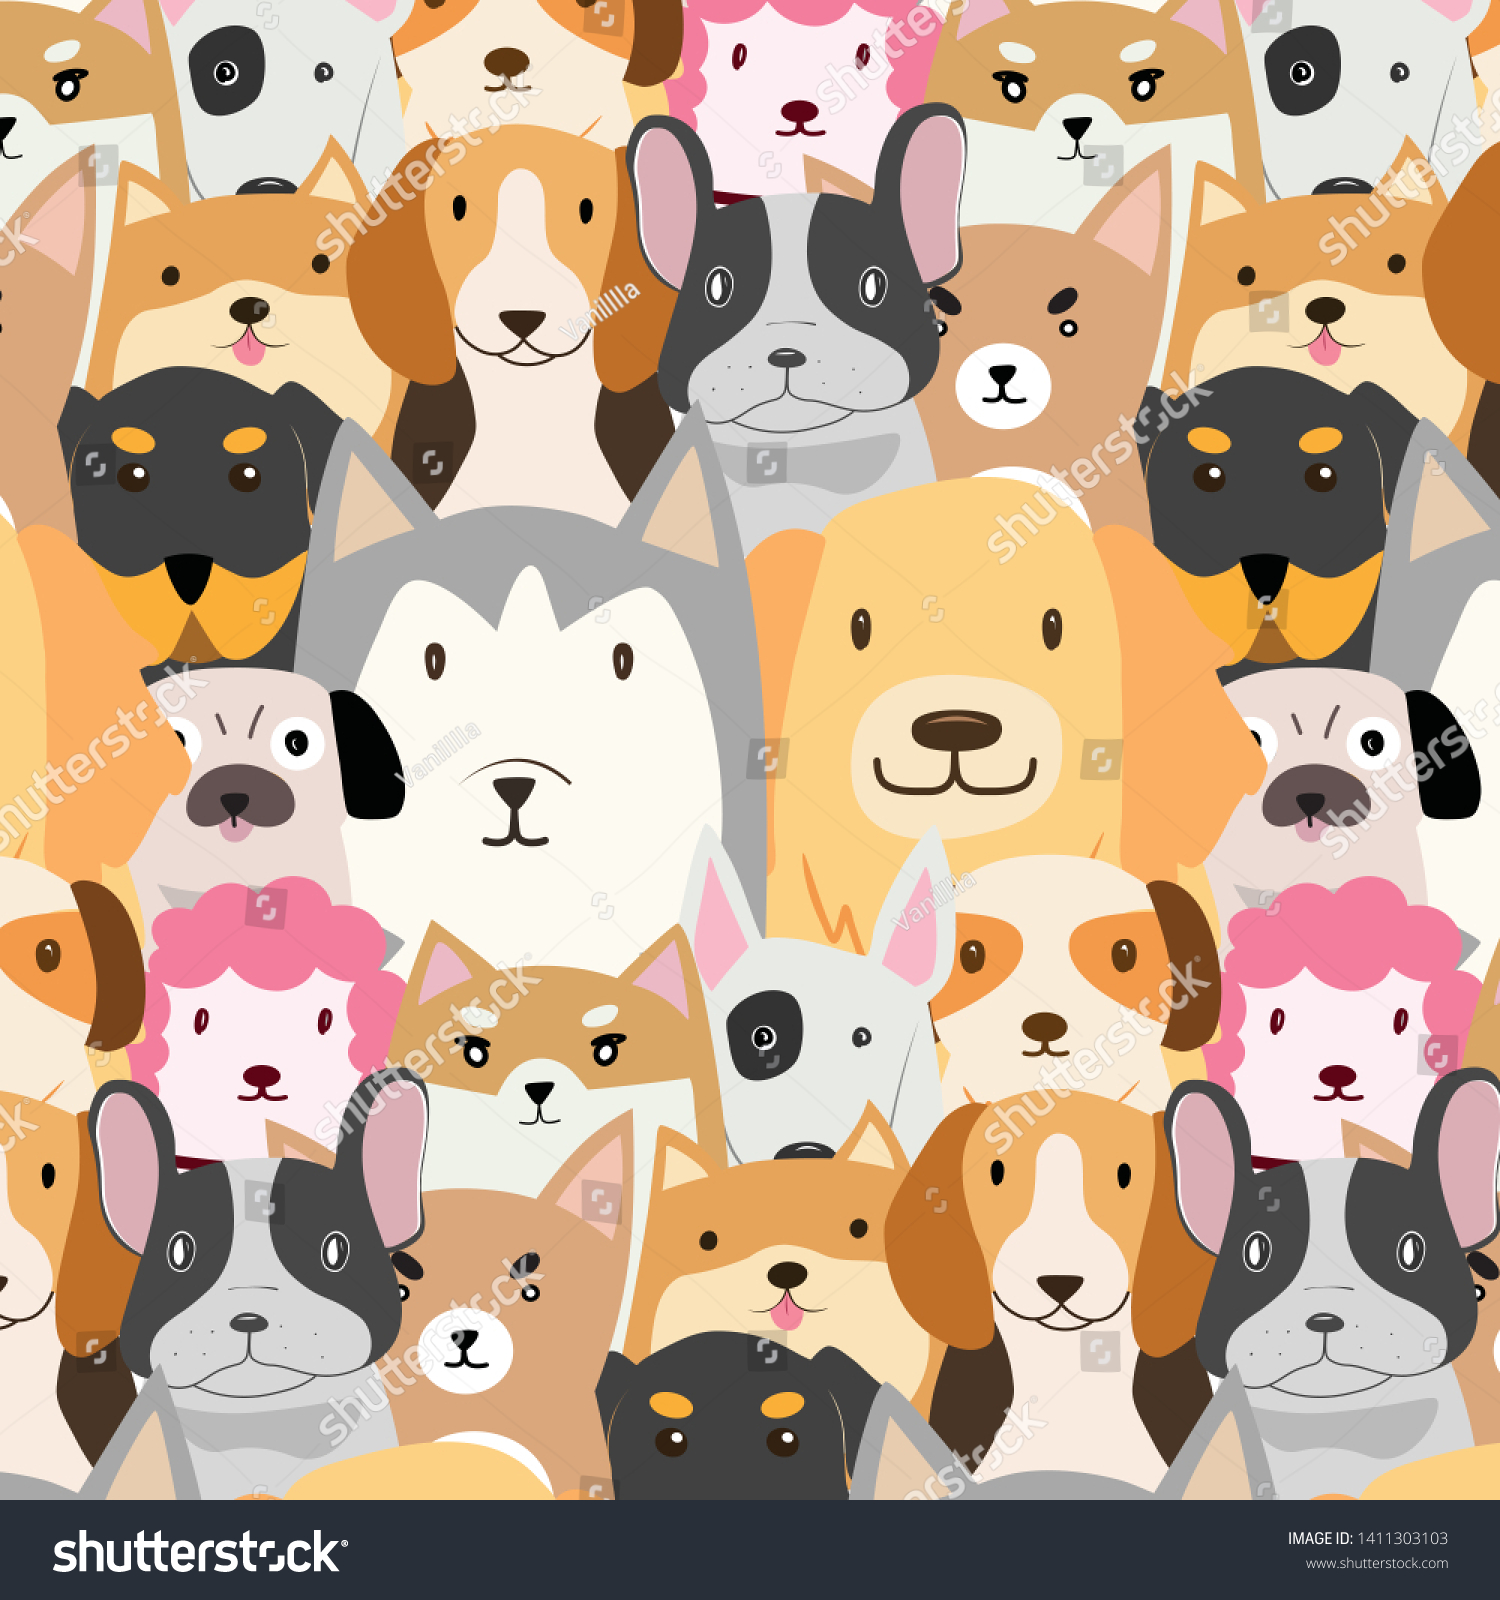 Pictures Of Anime Dogs Wallpapers